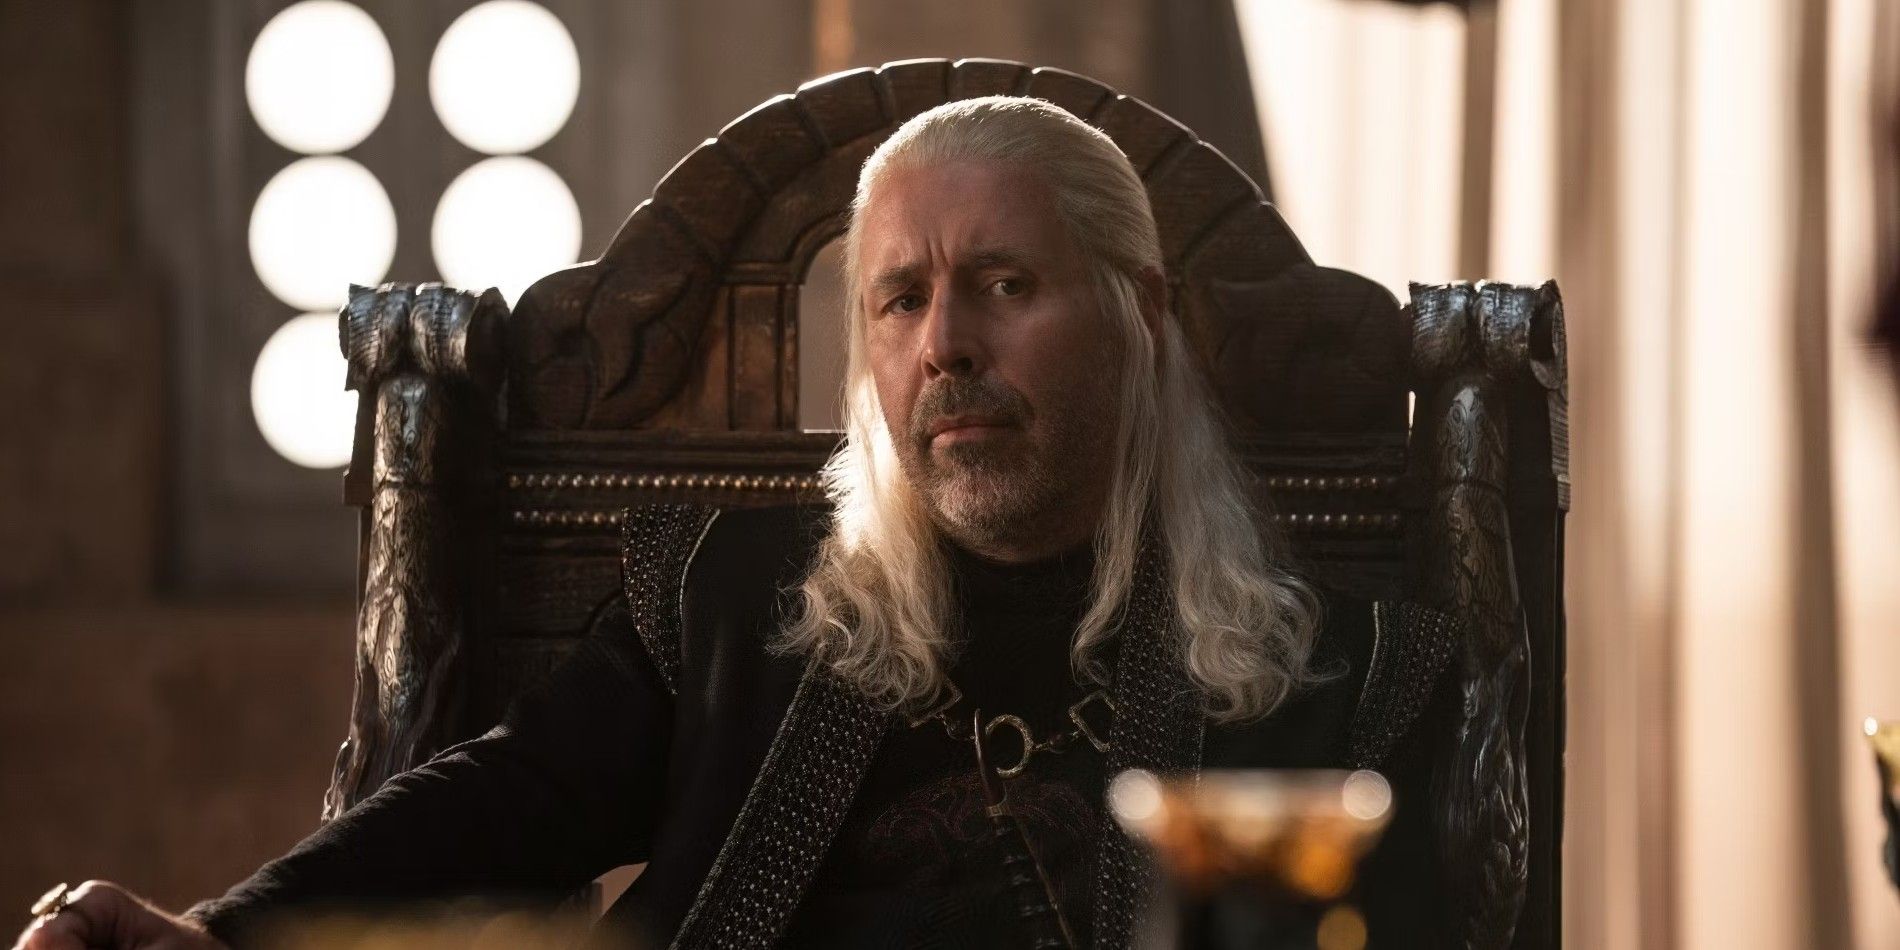 Paddy Considine as King Viserys in HBO's House of the Dragon